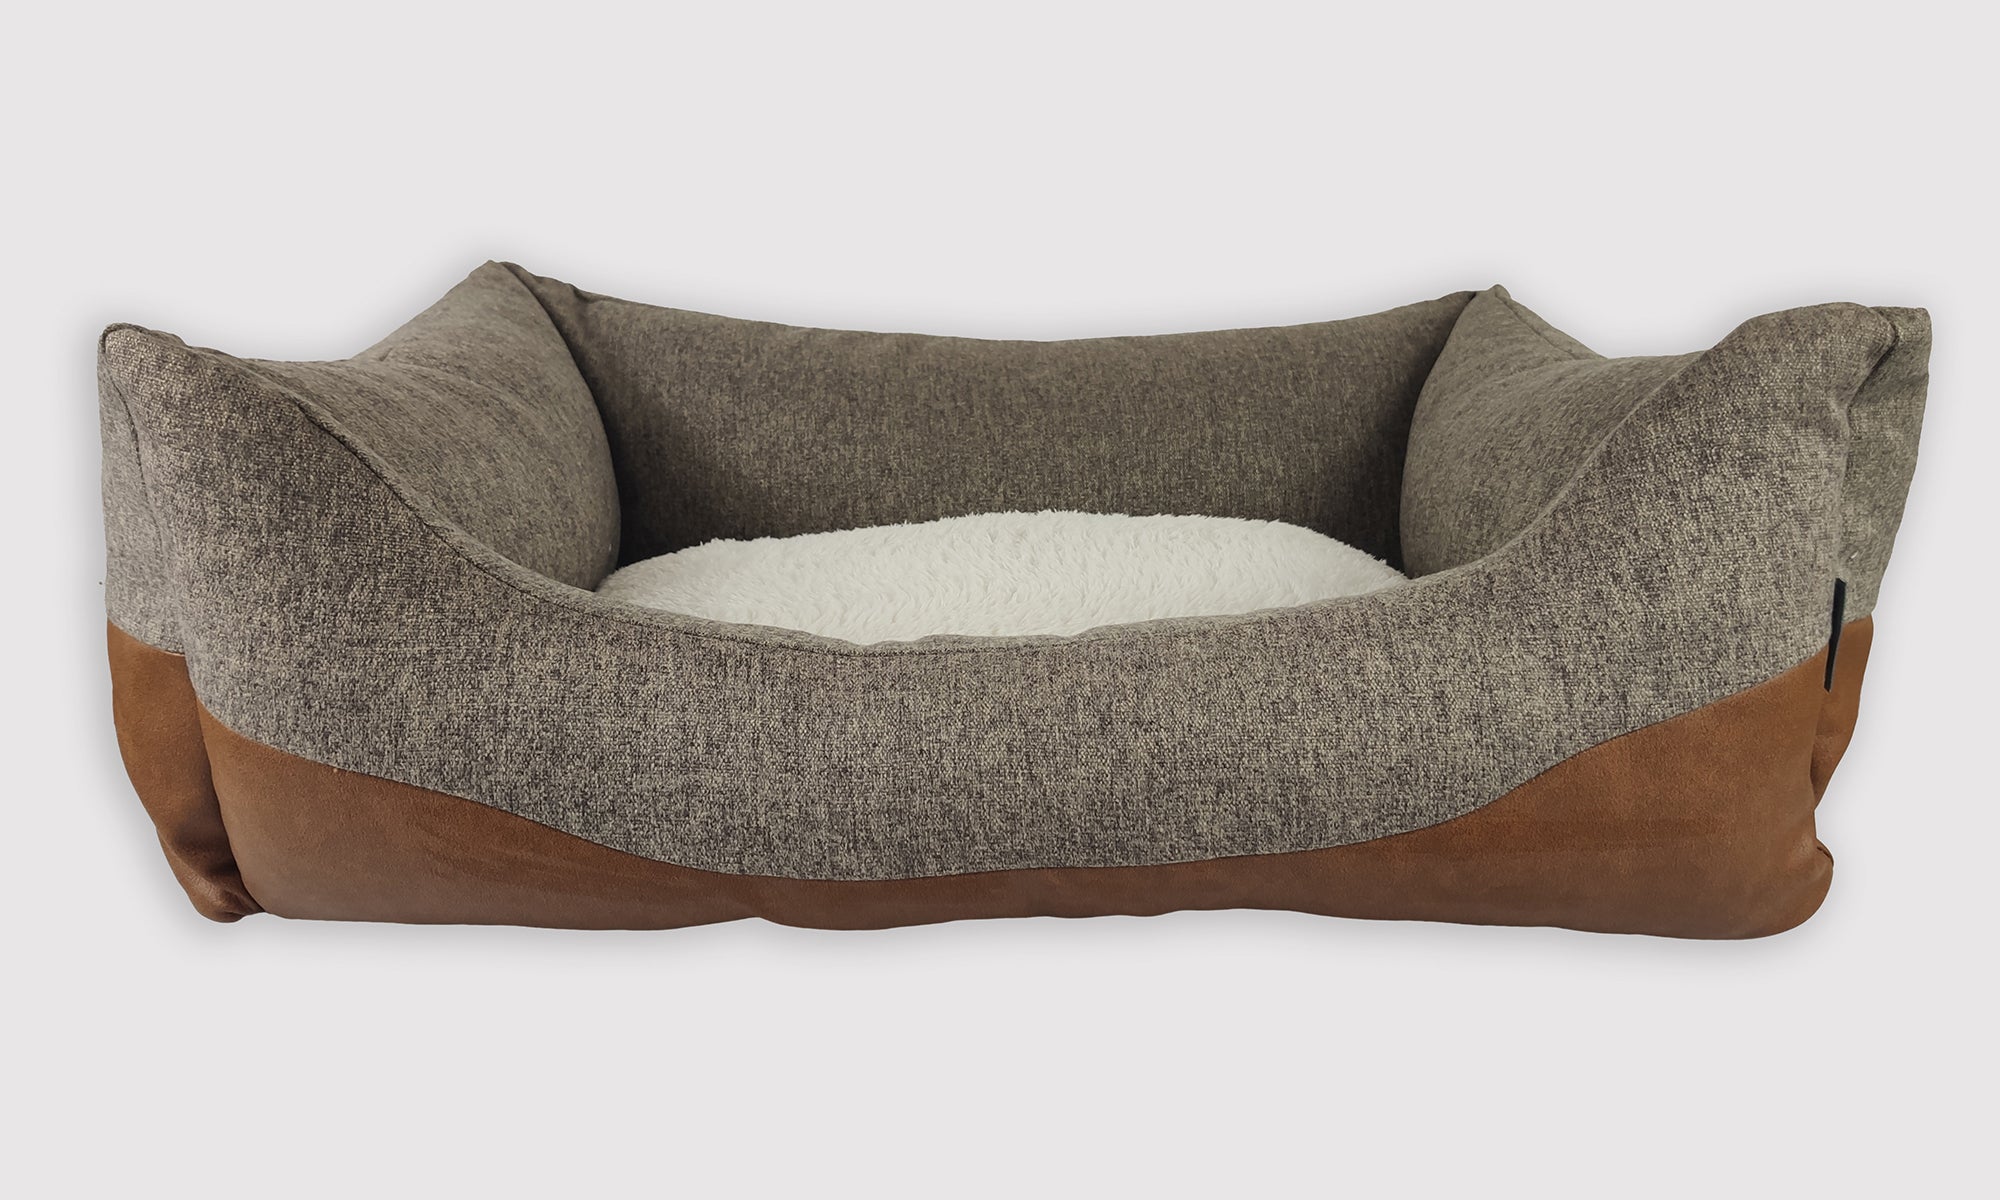 Hillfoot Nest Dog Bed - Small